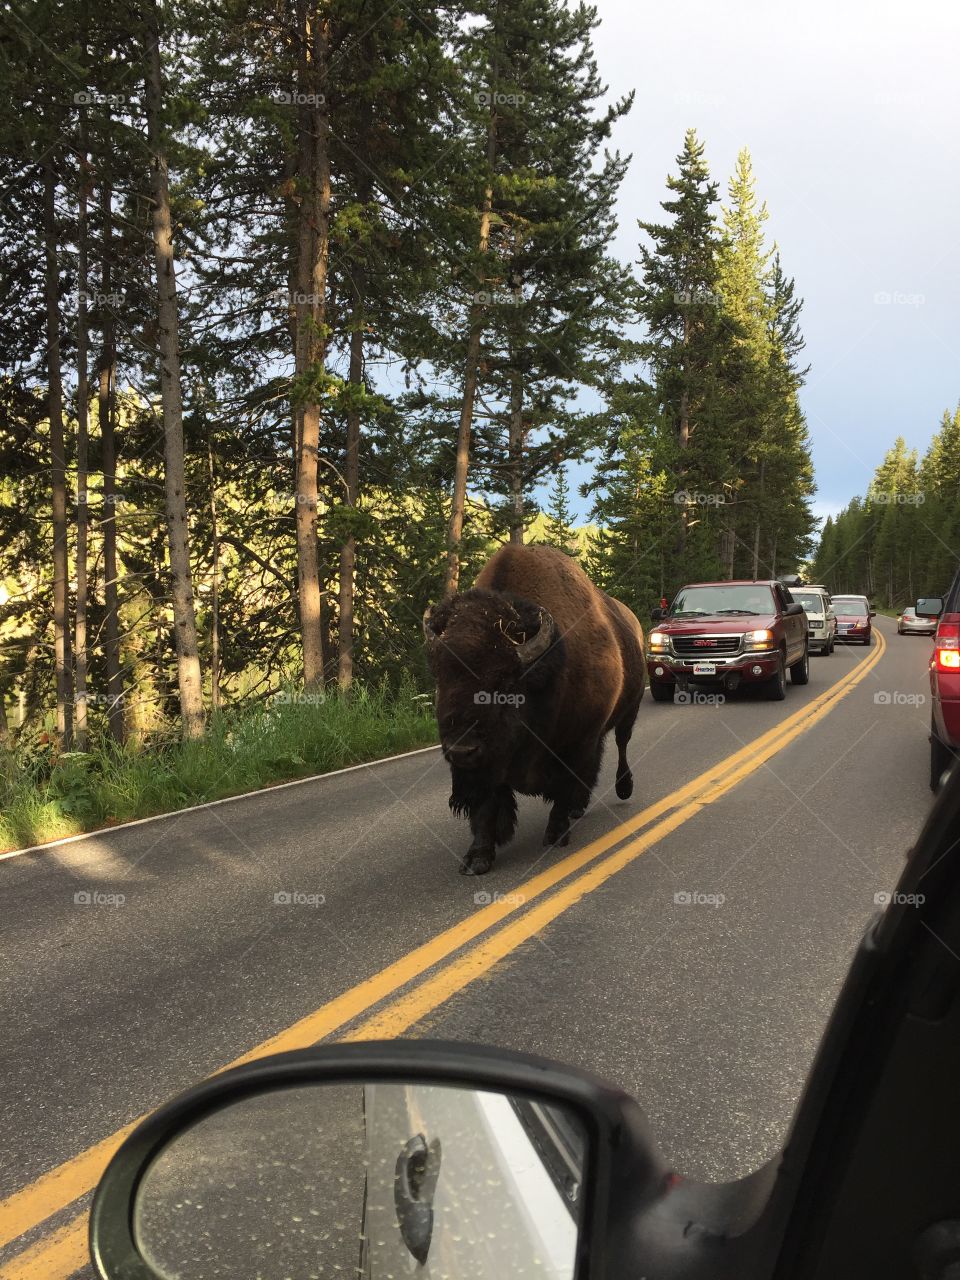 A common occurrence on my commute while I lived and worked in Yellowstone